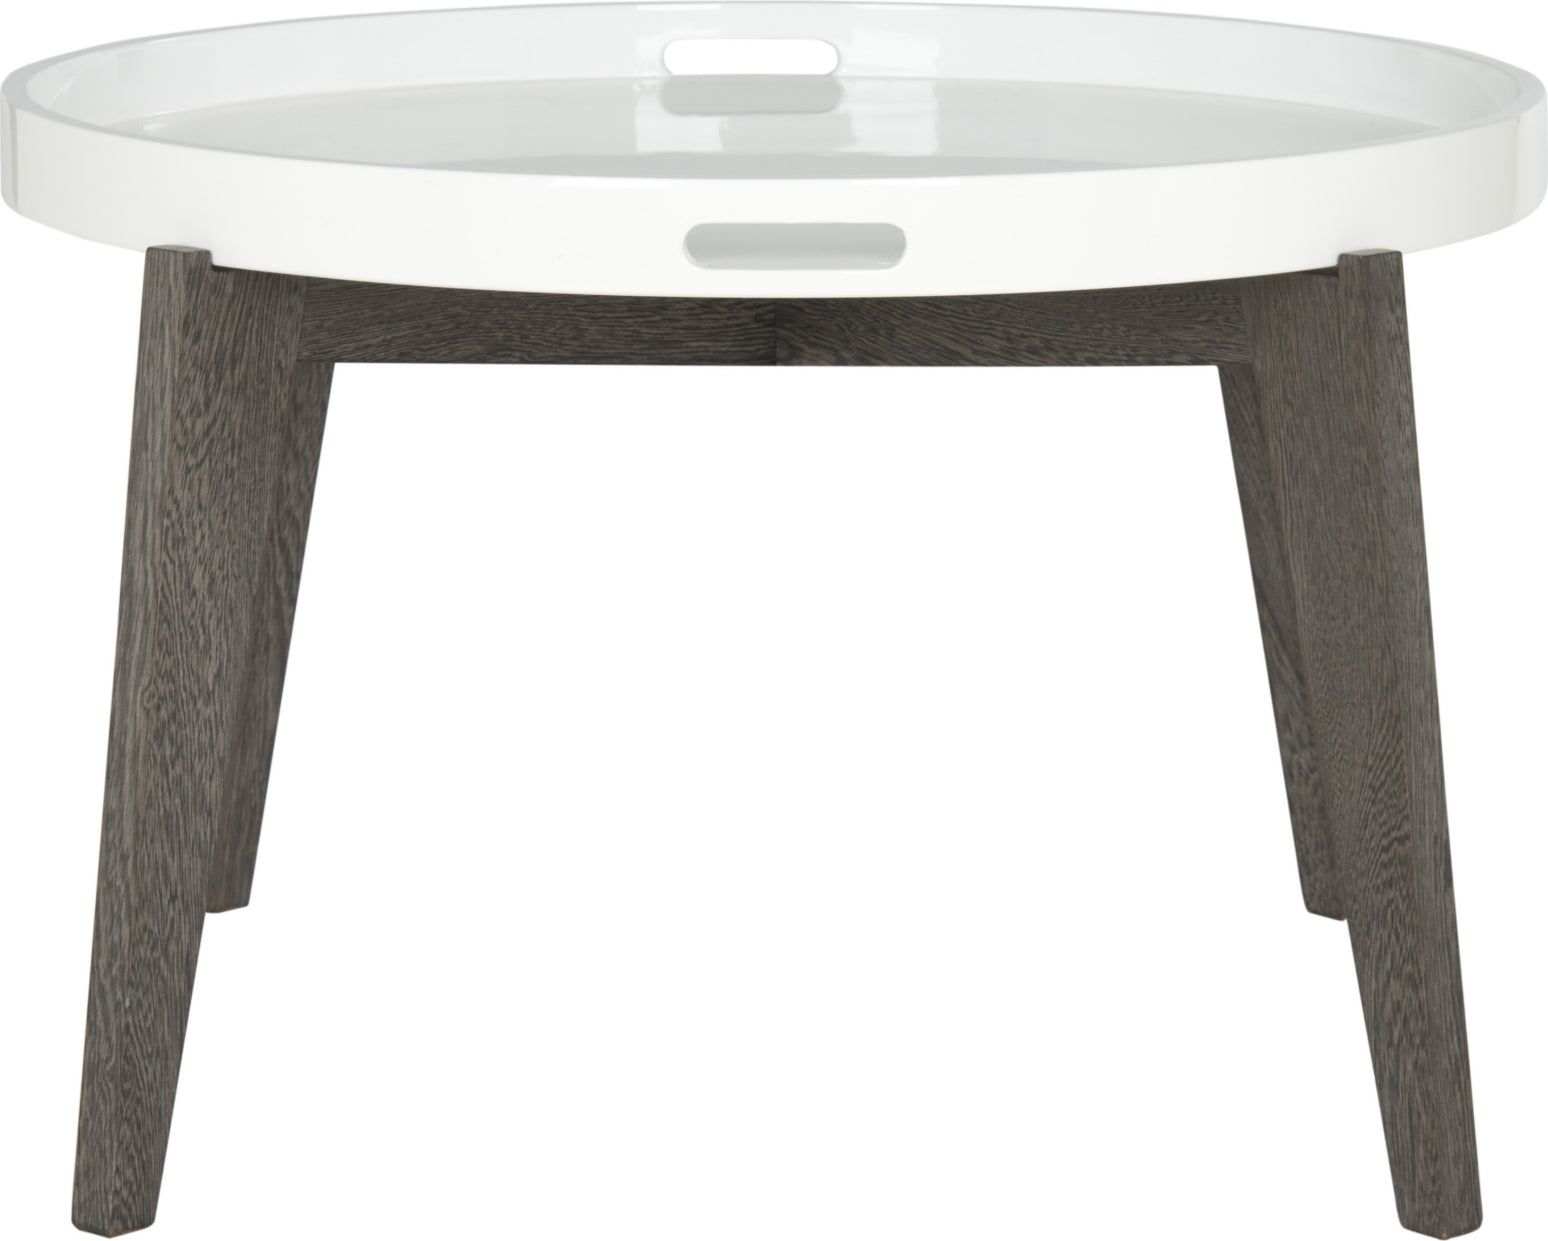 Safavieh Echo Mid Century Lacquer Tray Top End Table White and Dark Brown Furniture main image